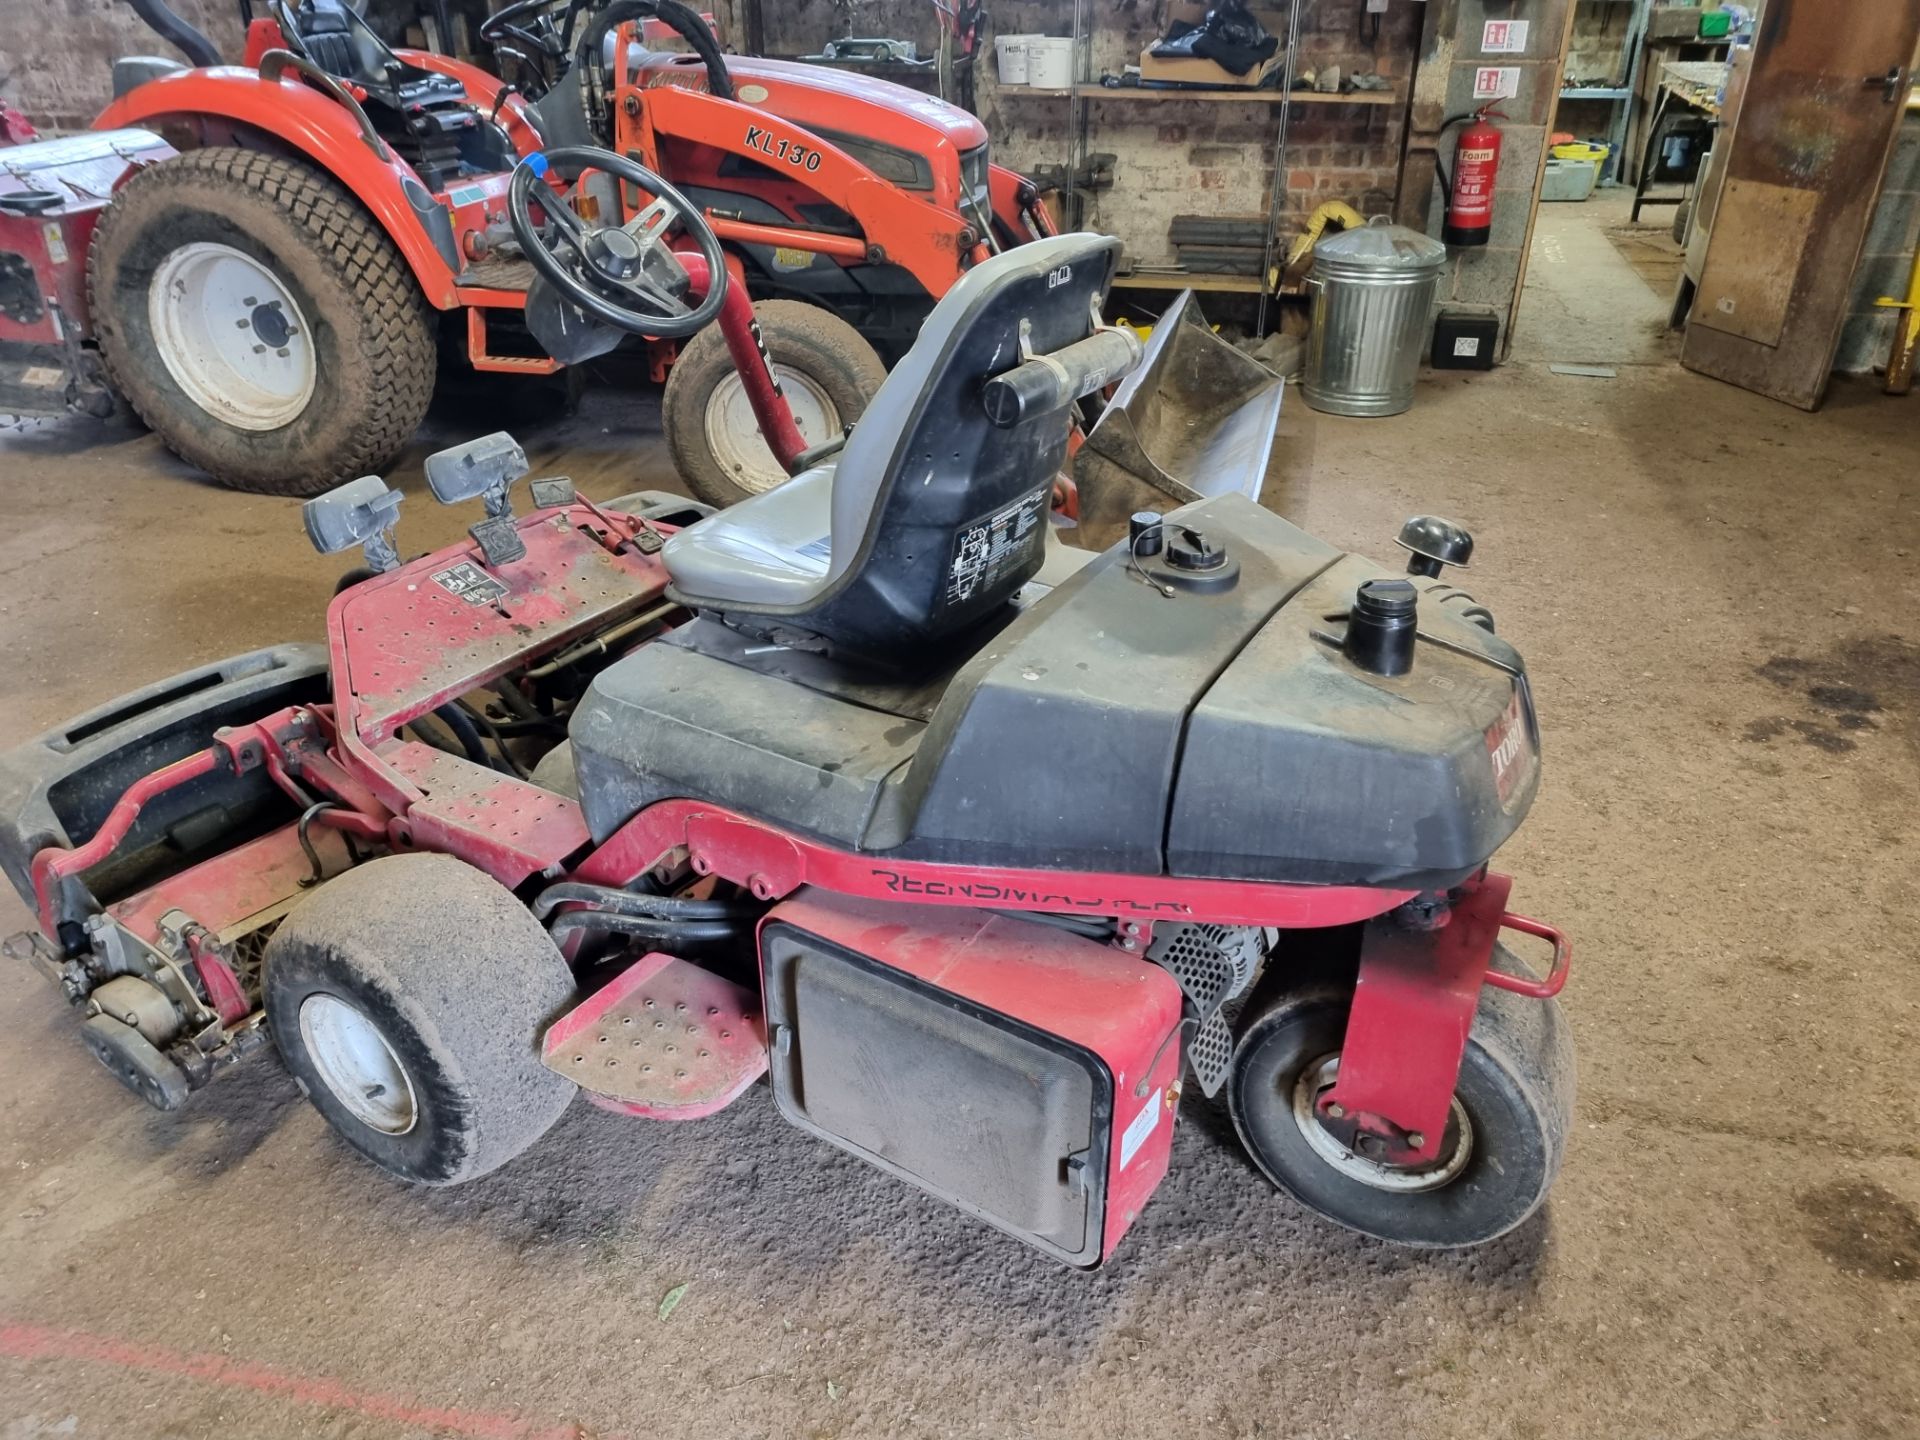 Toro Greensmaster 3250-D Mower YOM 2008 Hours 4121.6 (s/n 3632800001129) Features Briggs & - Image 8 of 10